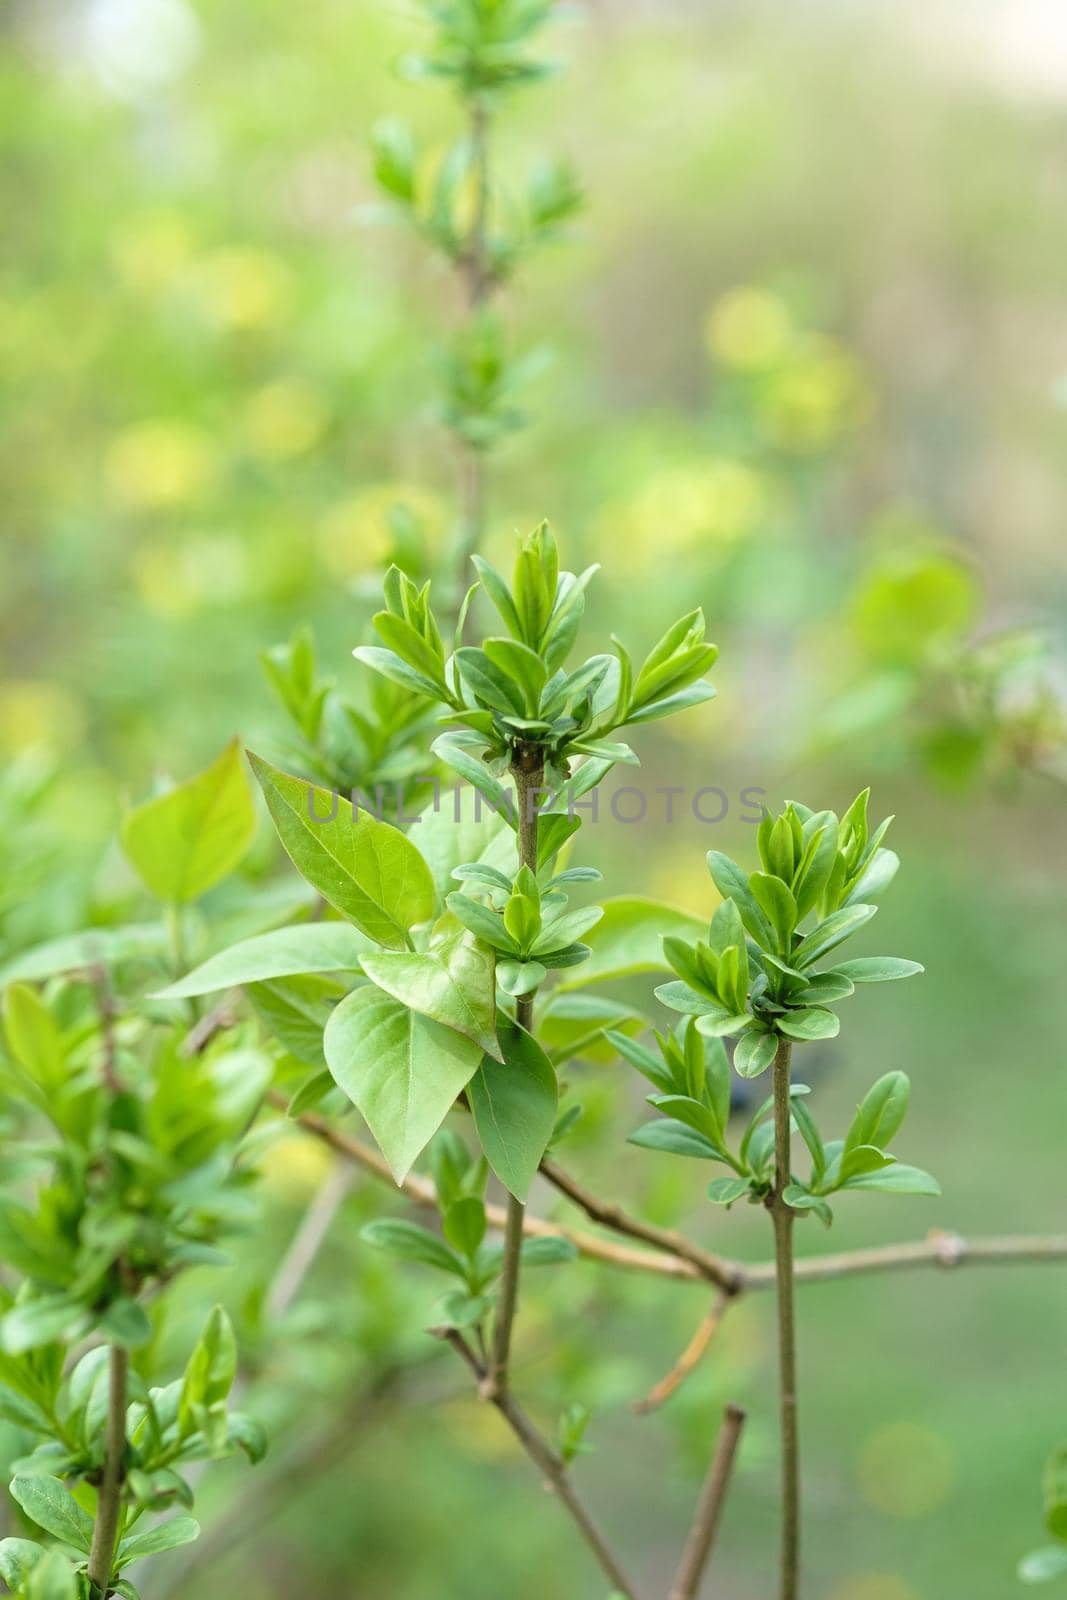 Green blooming leaves on branches, springtime season plants, selective focus.